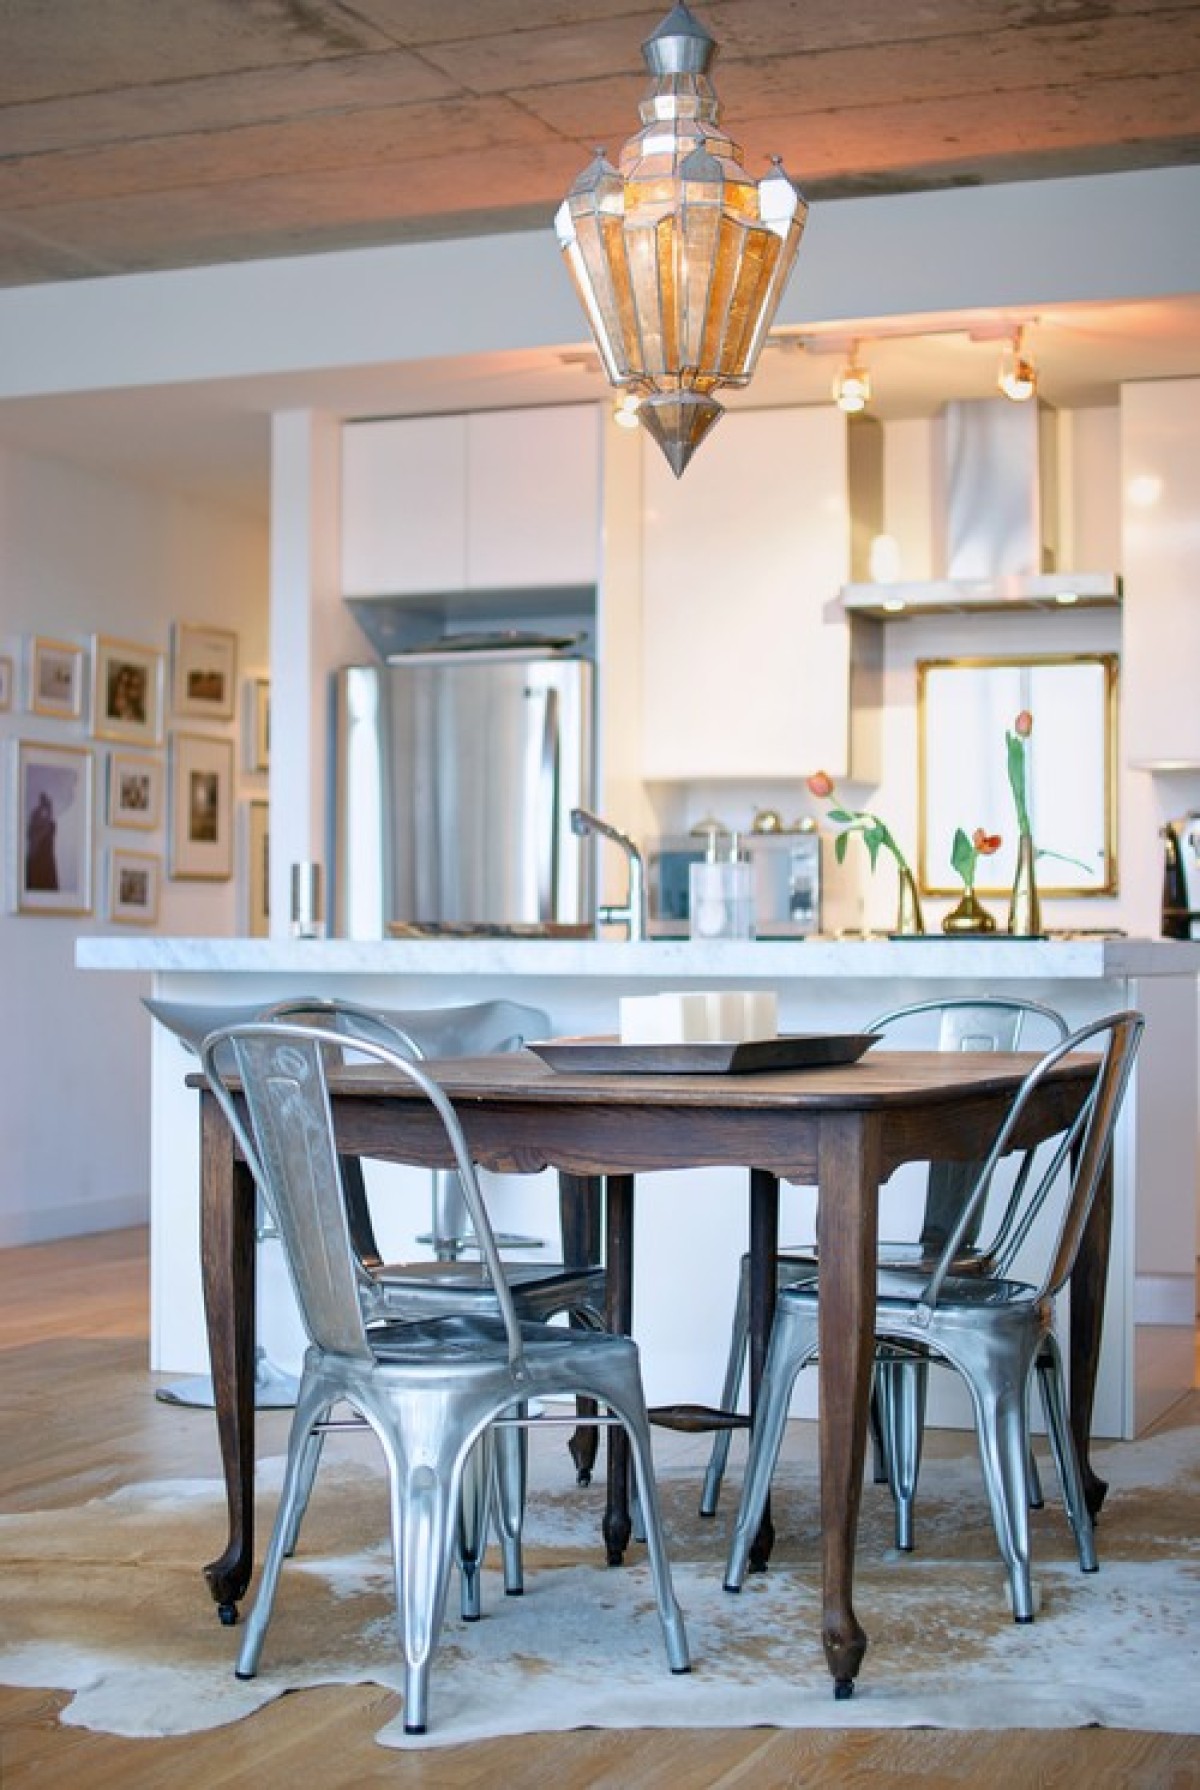 My Houzz: Calm, Cool and Collected in Downtown Toronto